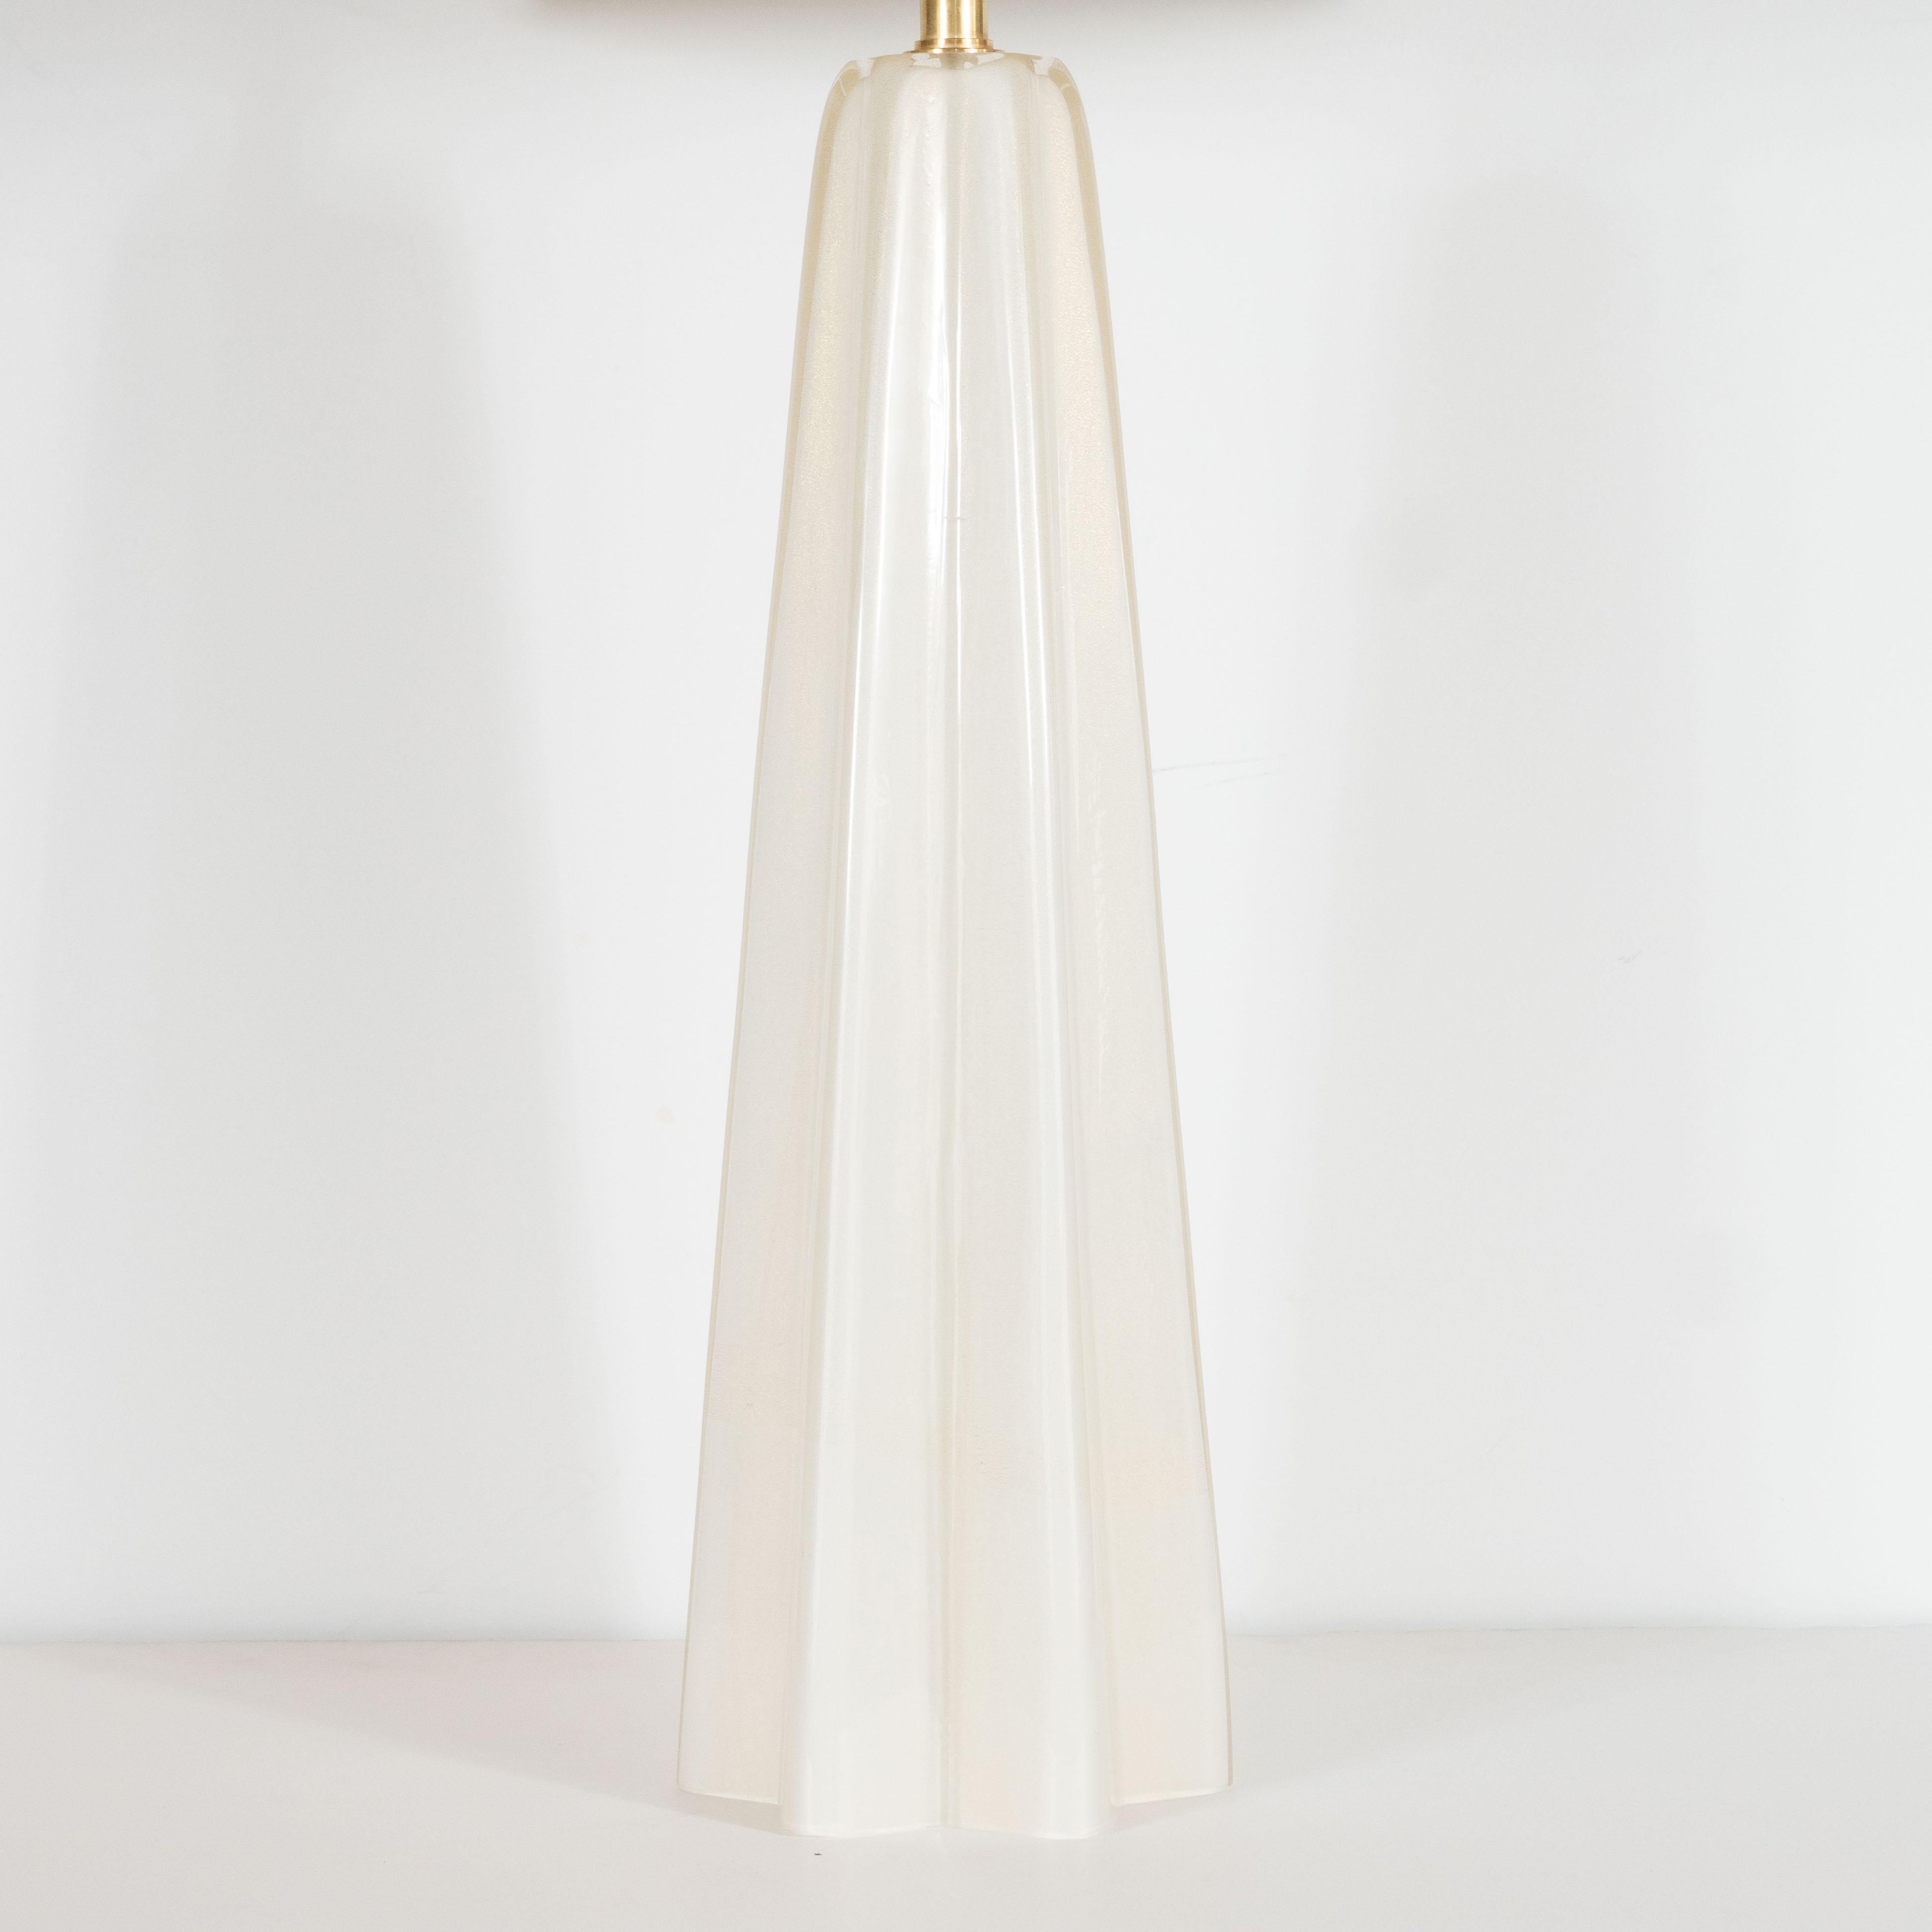 This elegant pair of table lamps were hand blown in Murano, Italy- the island off the coast of Venice renowned for centuries for its superlative glass production. They feature tapered stylized x-form bodies with subtly concave sides that connect the